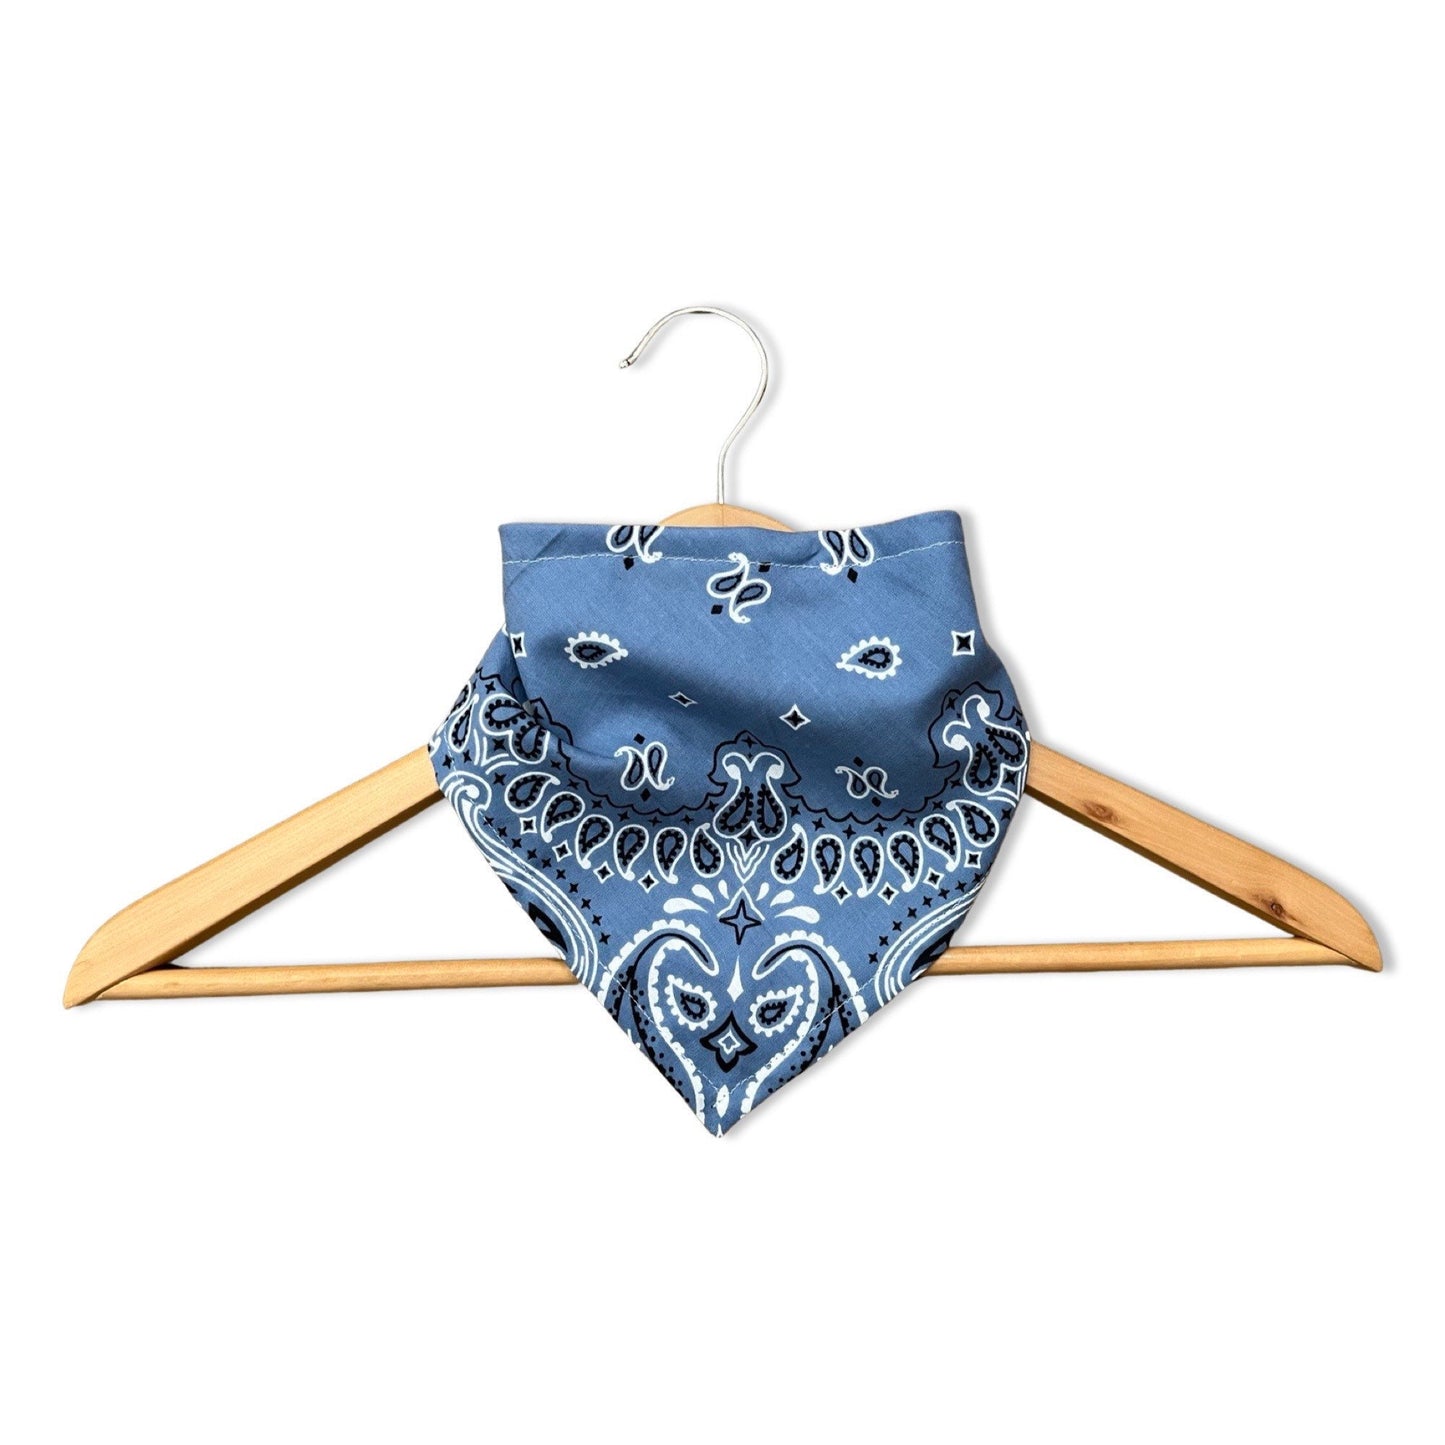 Bandana Bib for Baby - Available in 5 colors